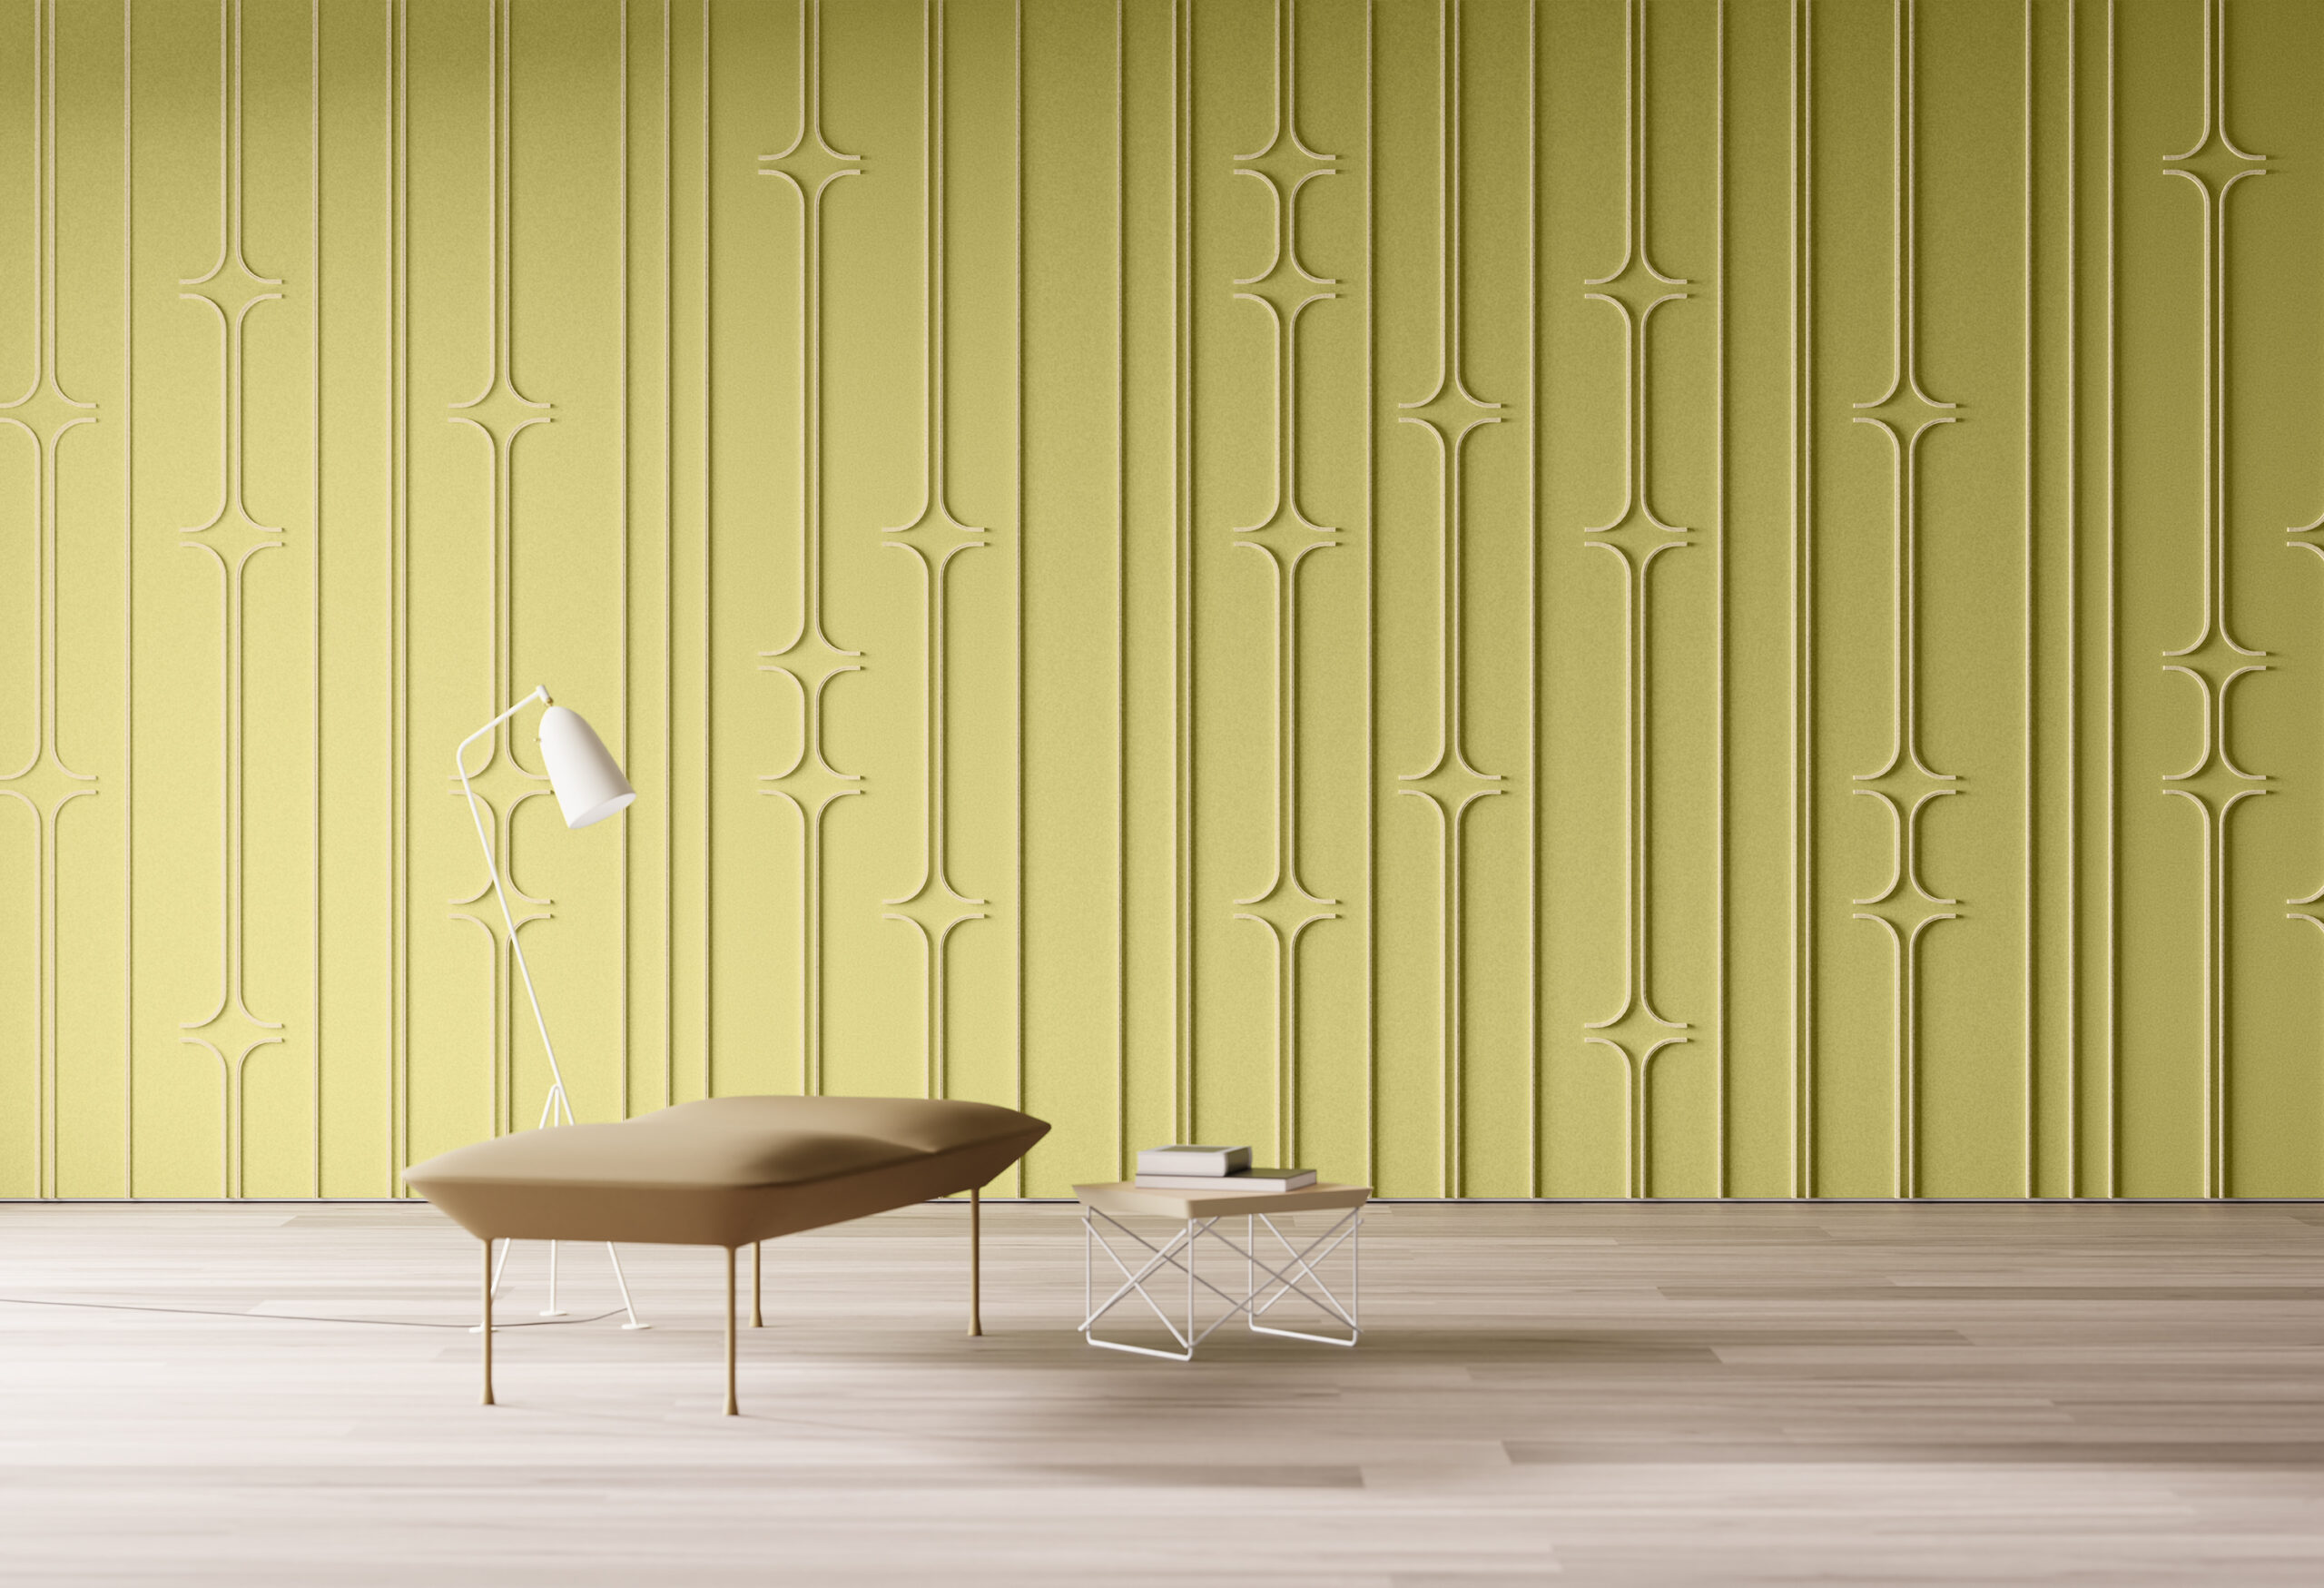 An office space with a cream felt wall covering with alternating vertical rectangular shapes.